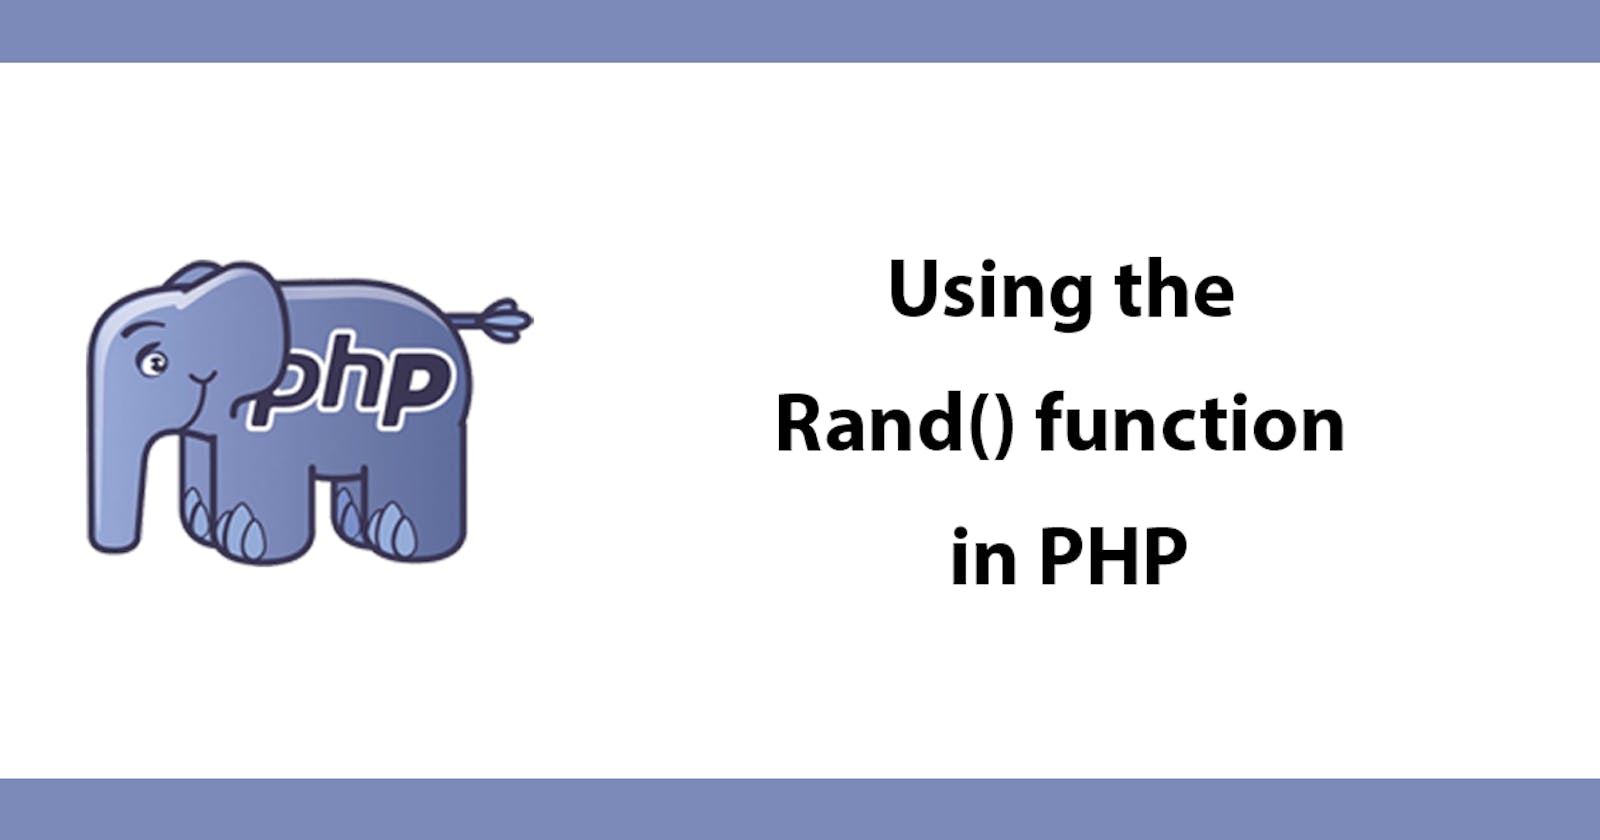 Using the Rand() function in PHP